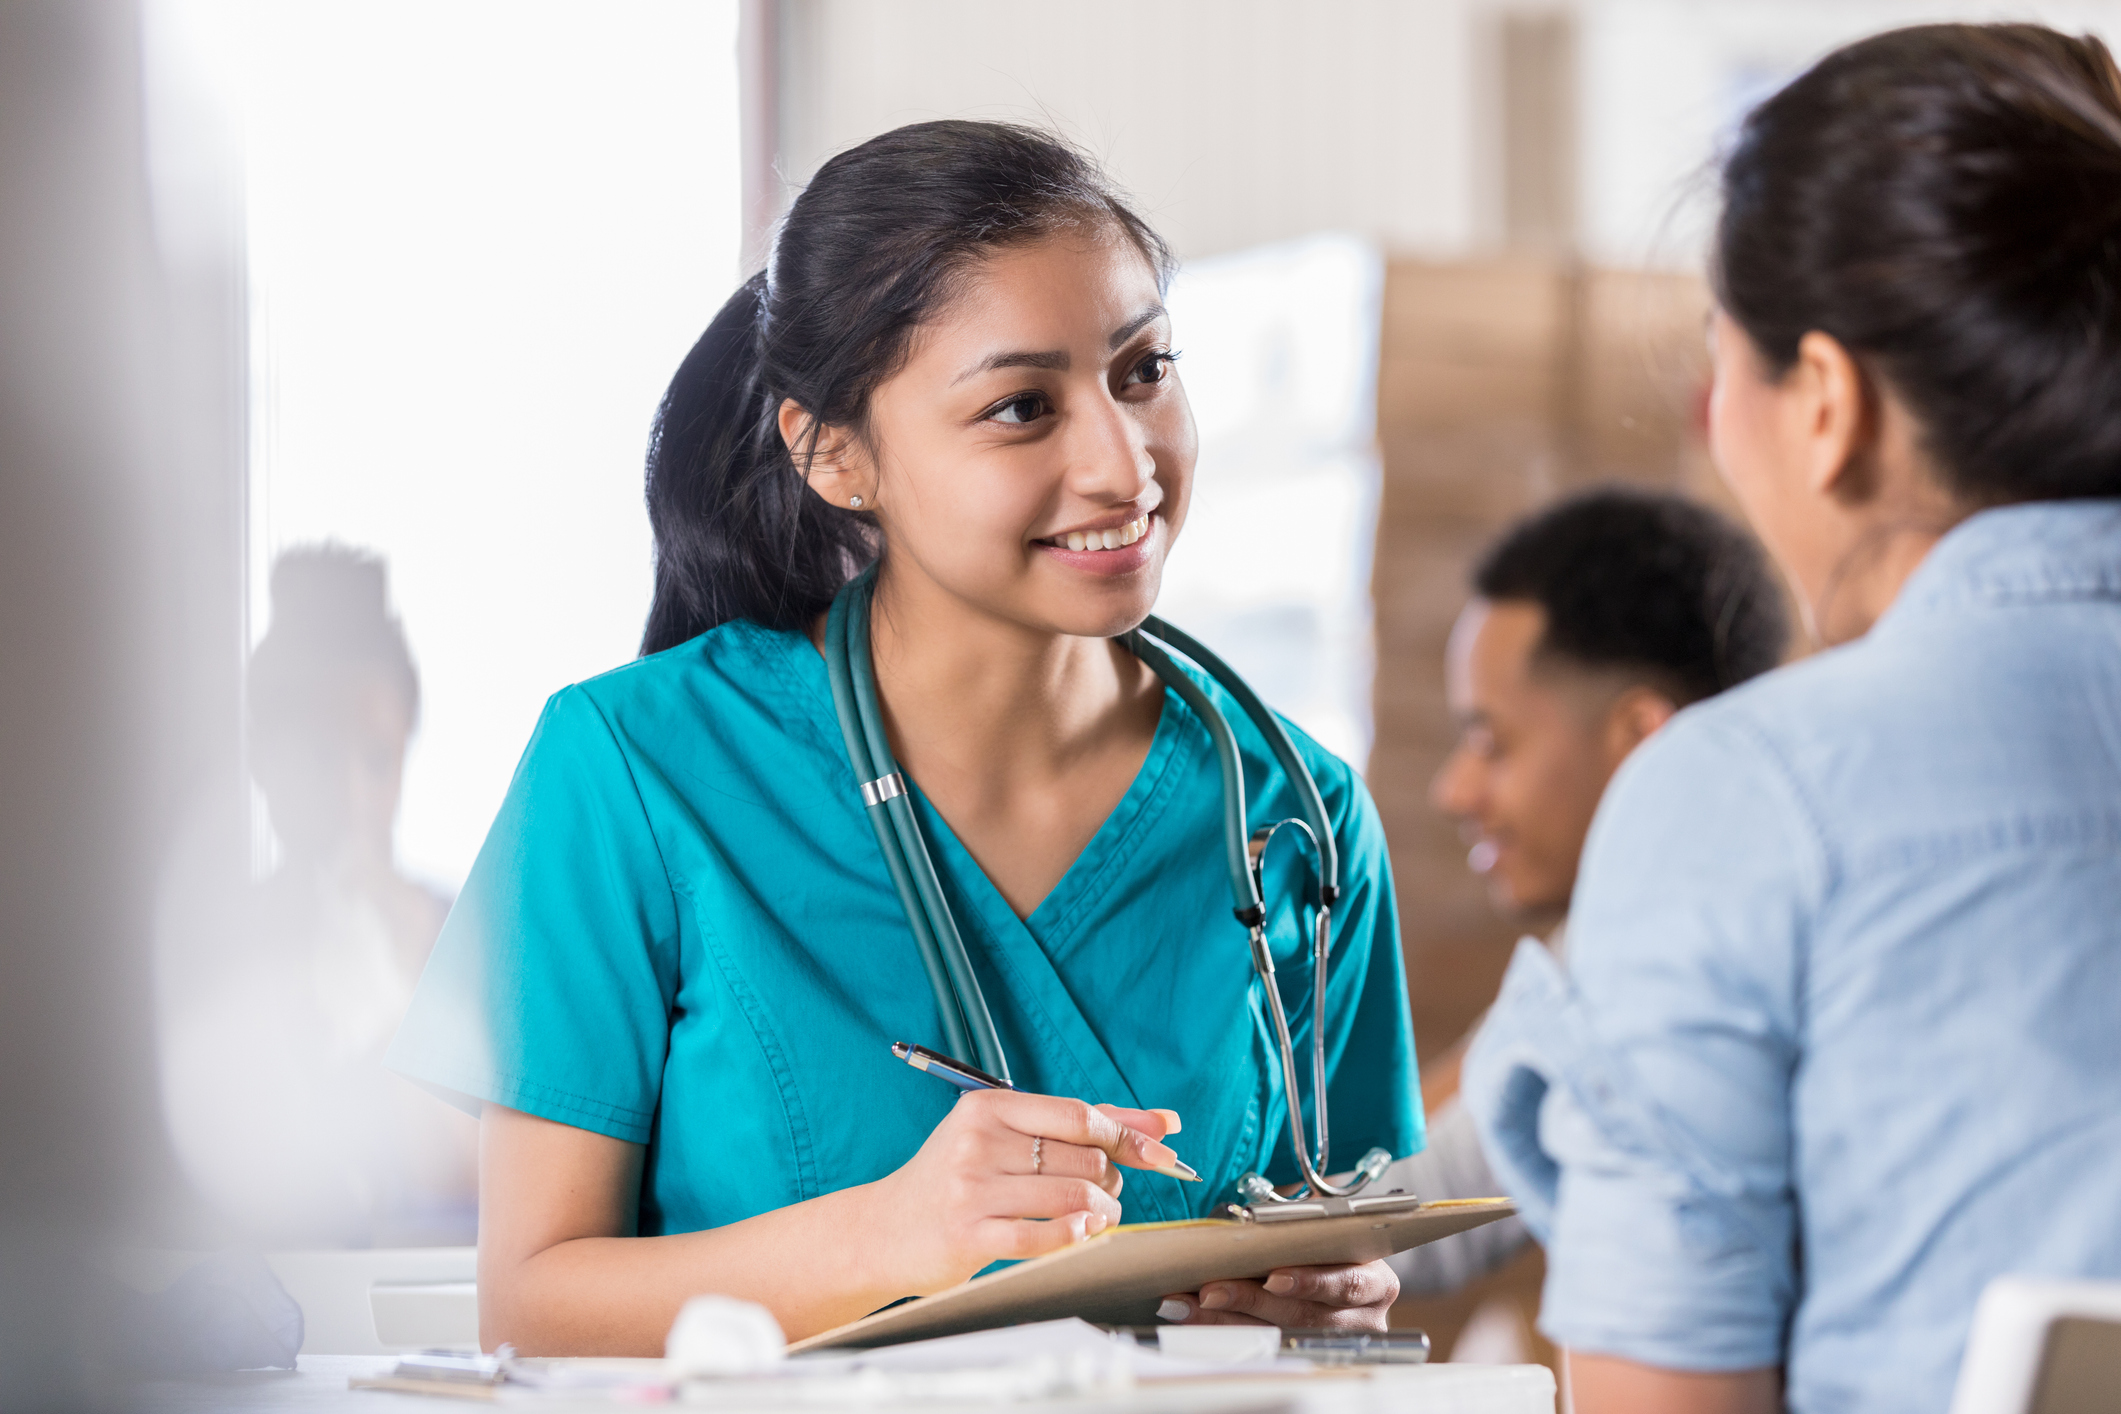 Medical Assisting as the Perfect Steppingstone into Medical Field